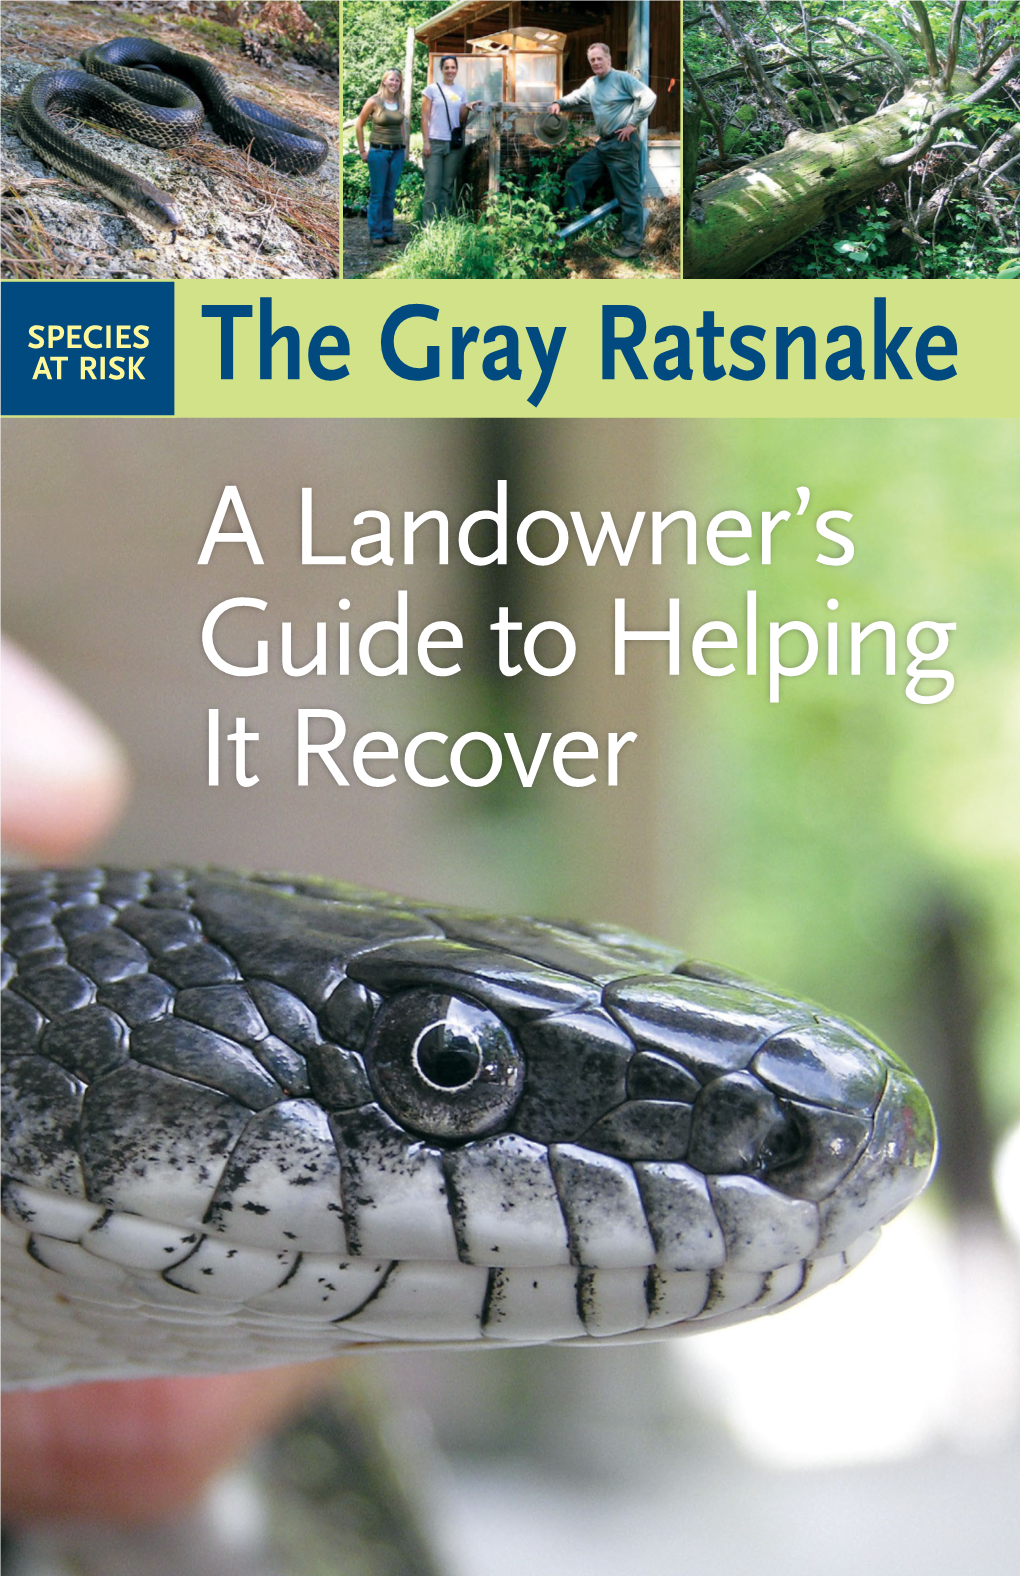 A Landowner's Guide to Helping It Recover